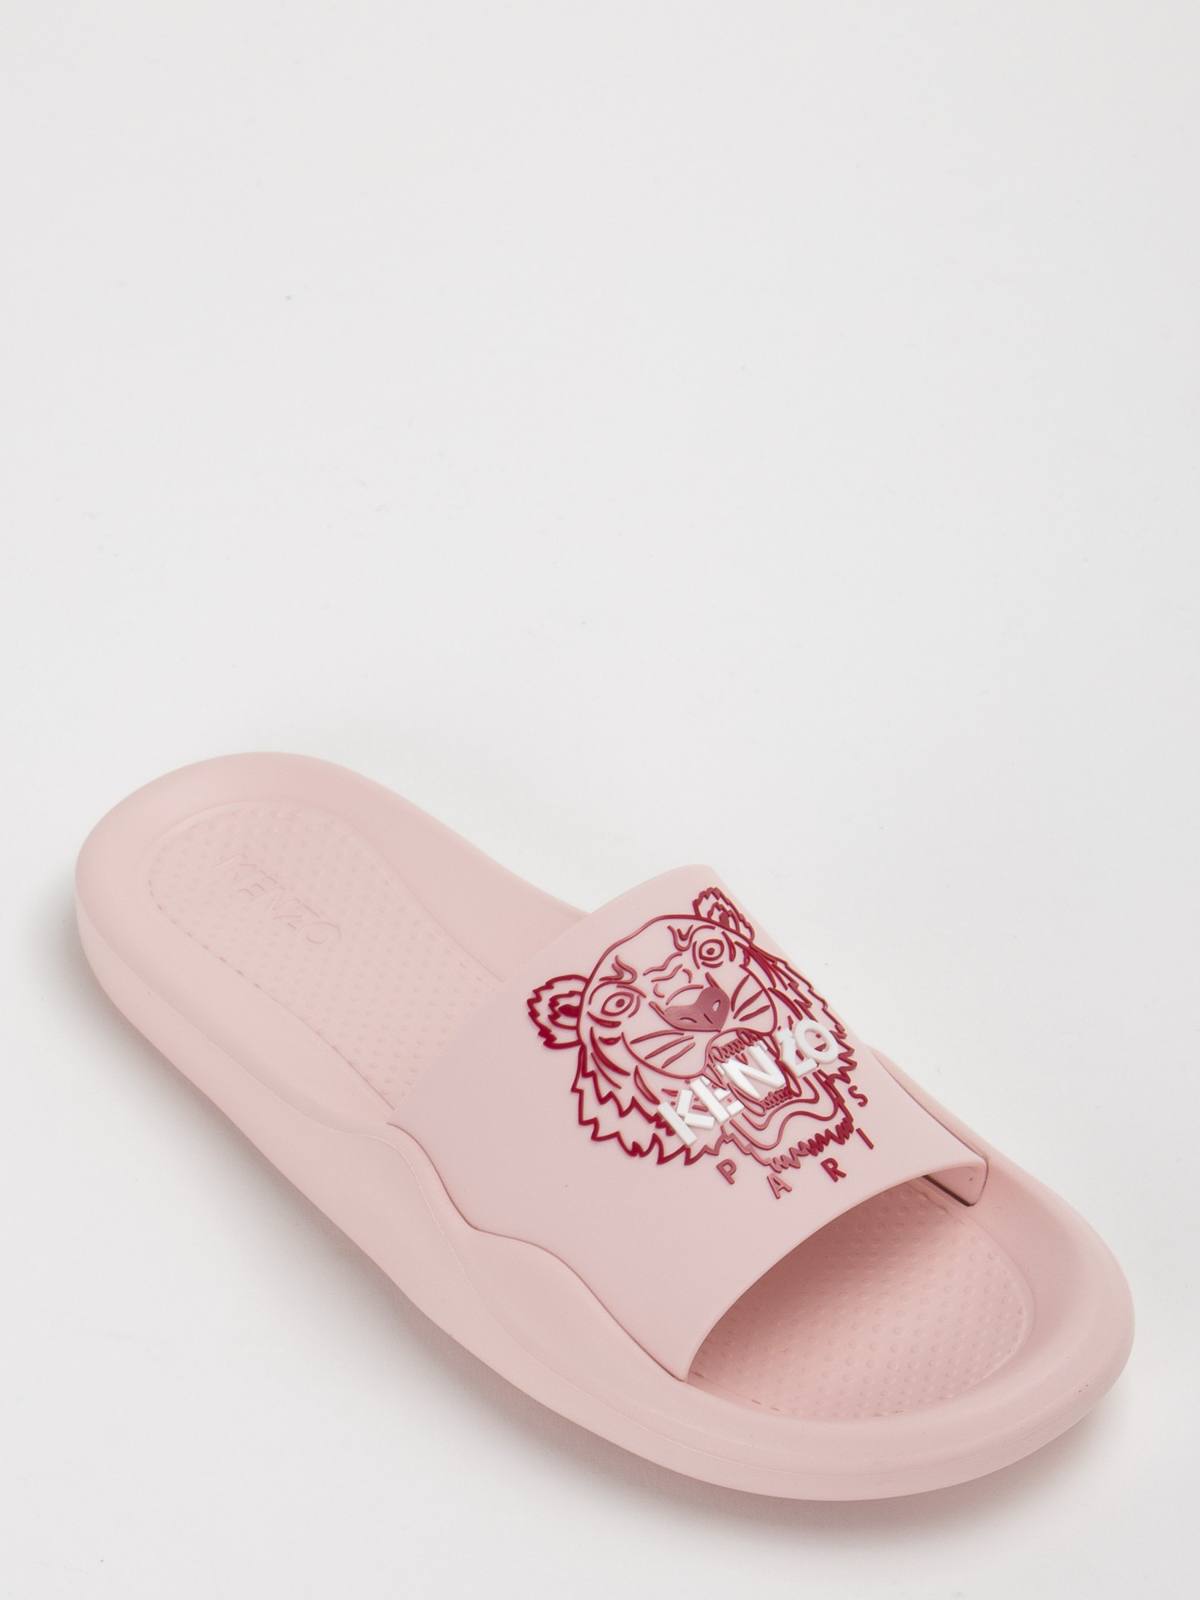 Flip flops Kenzo - Slippers - FC52MU104P6034A | Shop online at THEBS